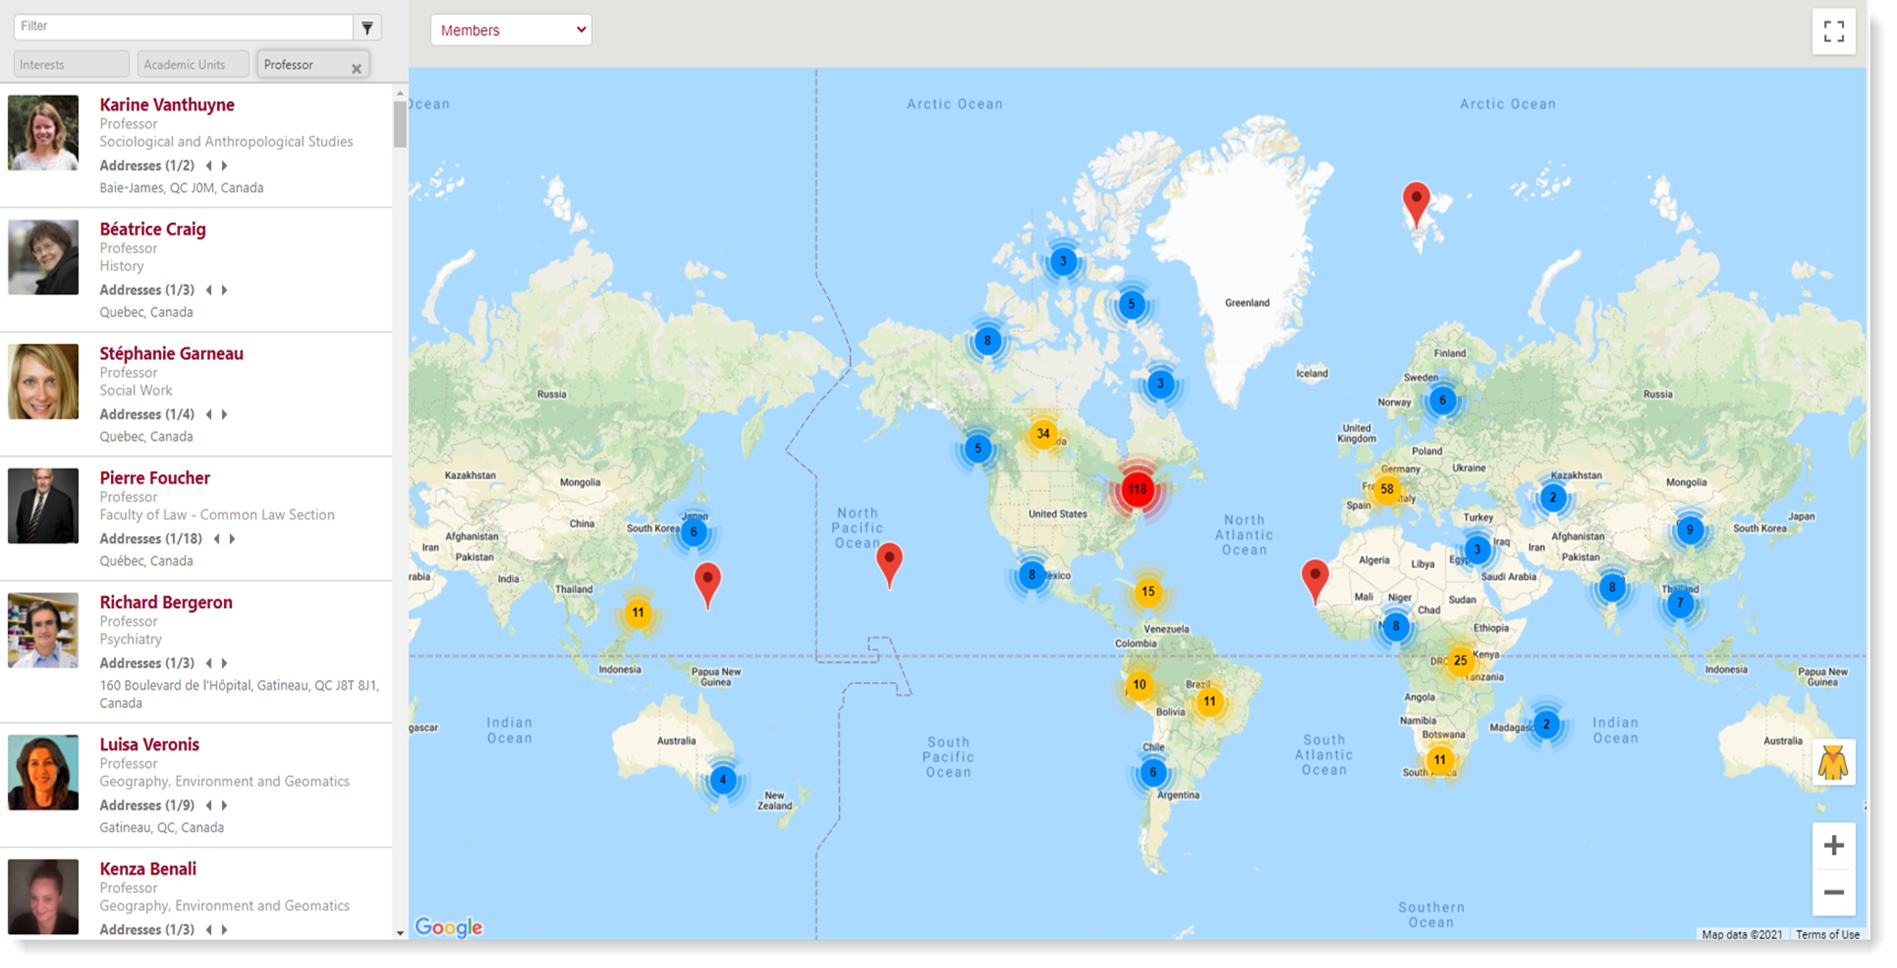 A world map depicting where researchers have done fieldwork.